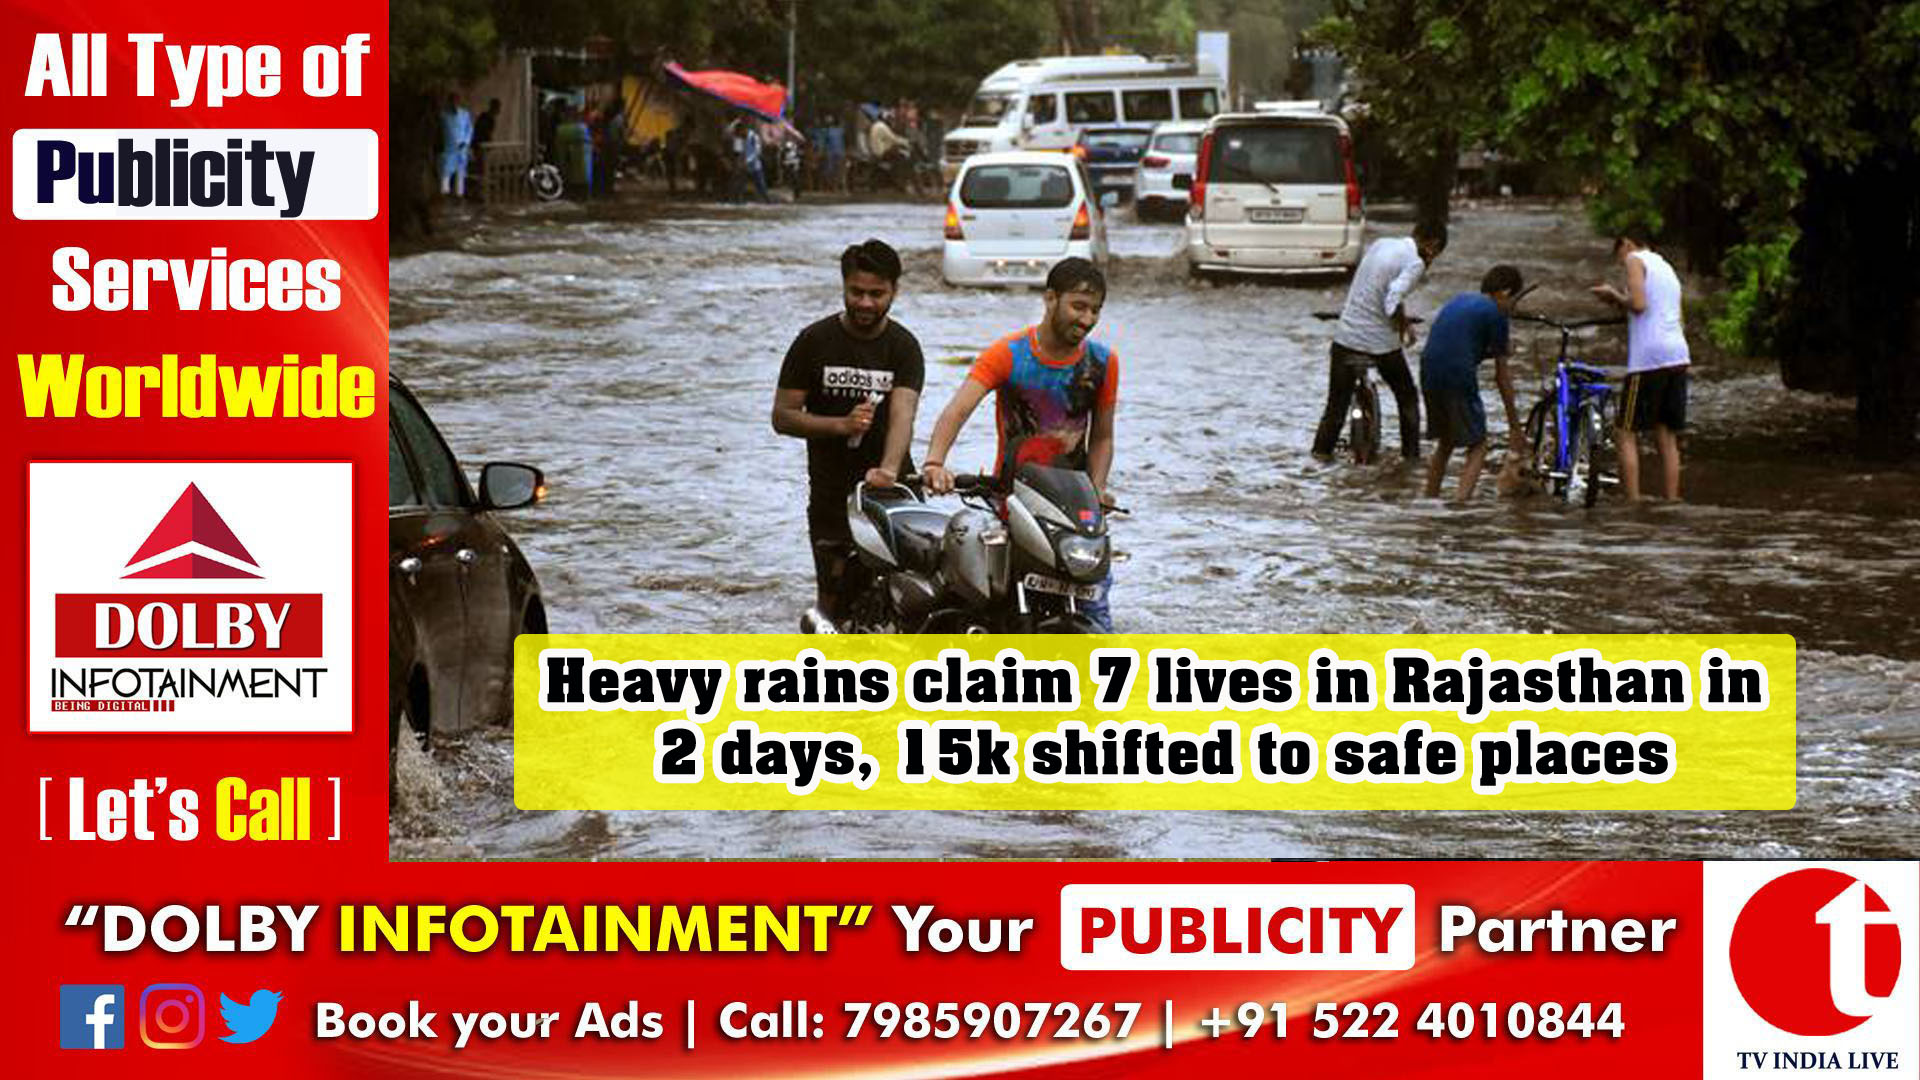 Heavy rains claim 7 lives in Rajasthan in 2 days, 15k shifted to safe places